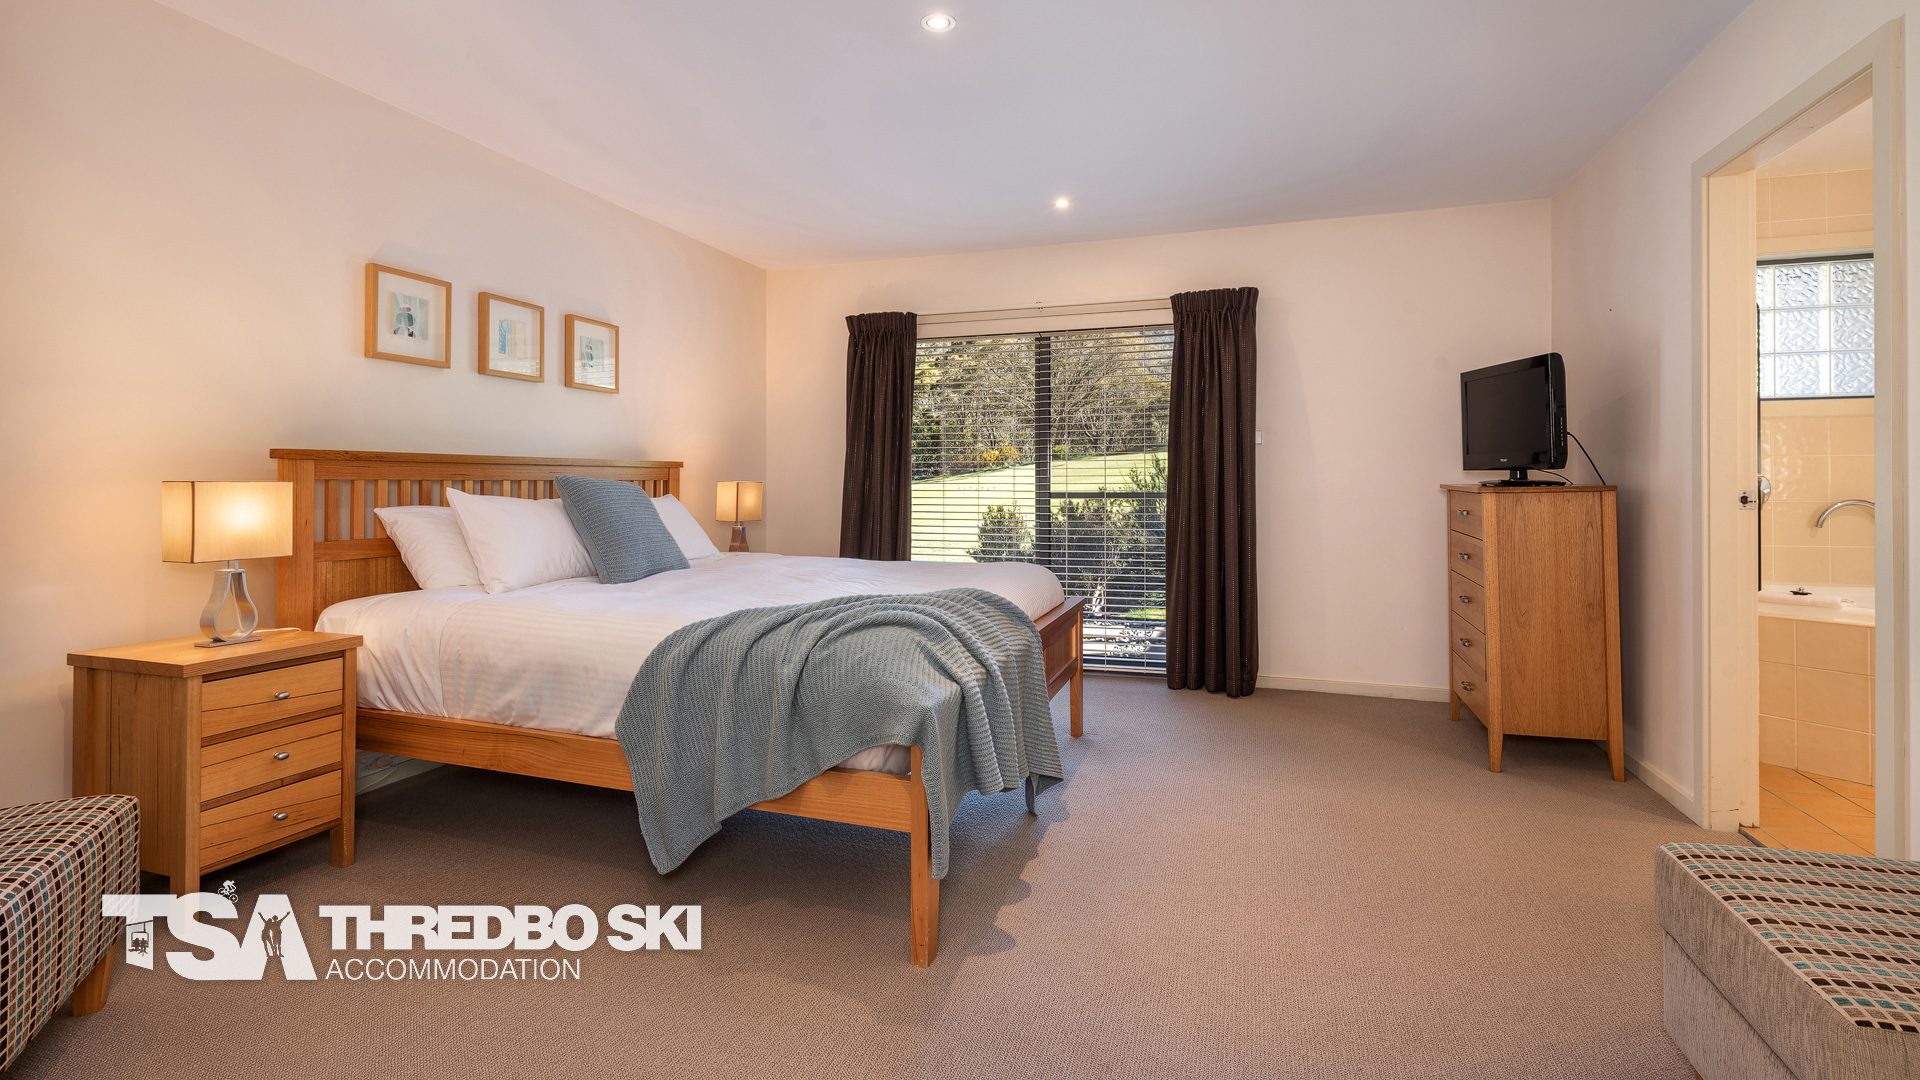 Snowbound 4 – One and Loft Chalet overlooking Thredbo Golf course <br>EOI over $1.6M